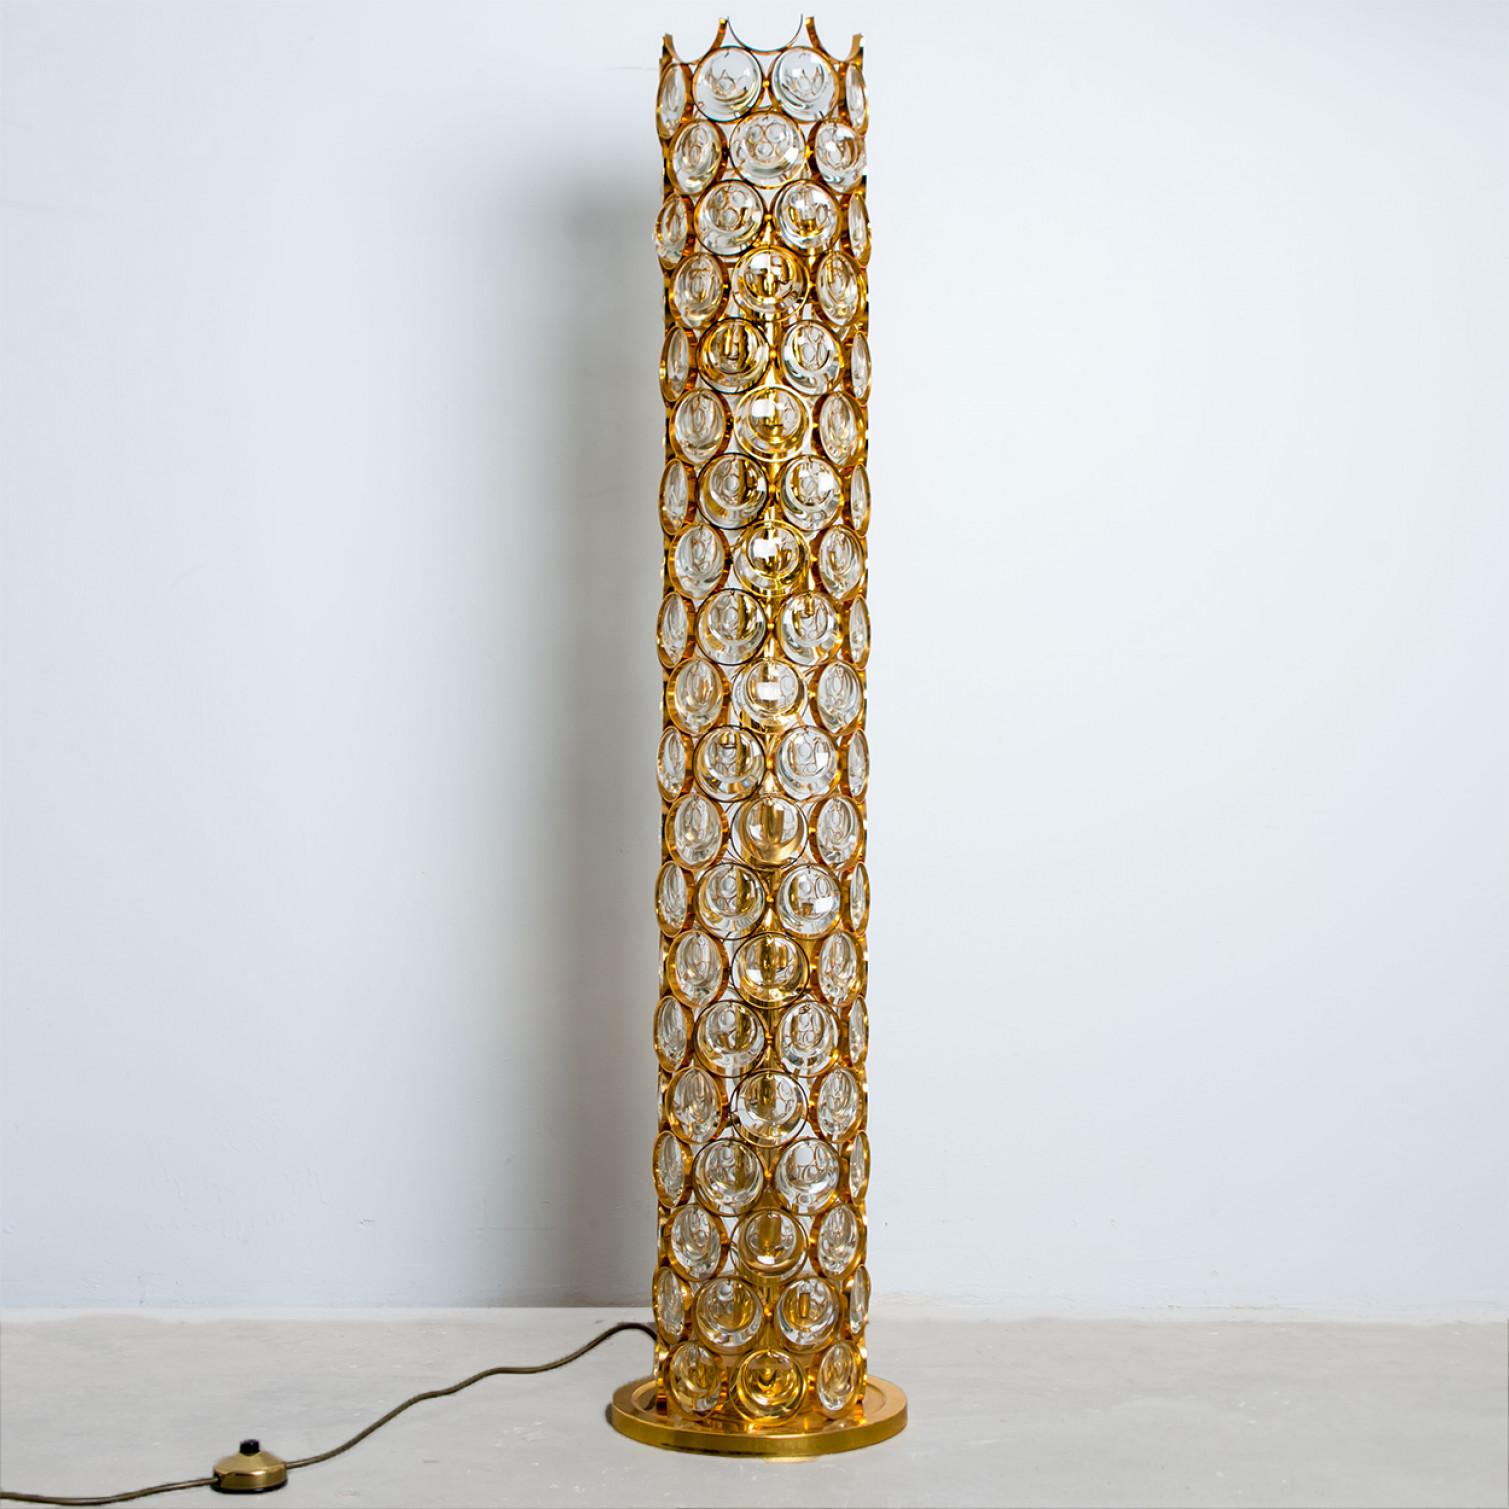 This is truly a jewel among the lamps. The gold-plated layer is of high quality and the crystal stones sparkle richly.

This large, heavy glamorous lamp is made entirely pure and polished with care.
A real eyecatcher with gold-plated circles and